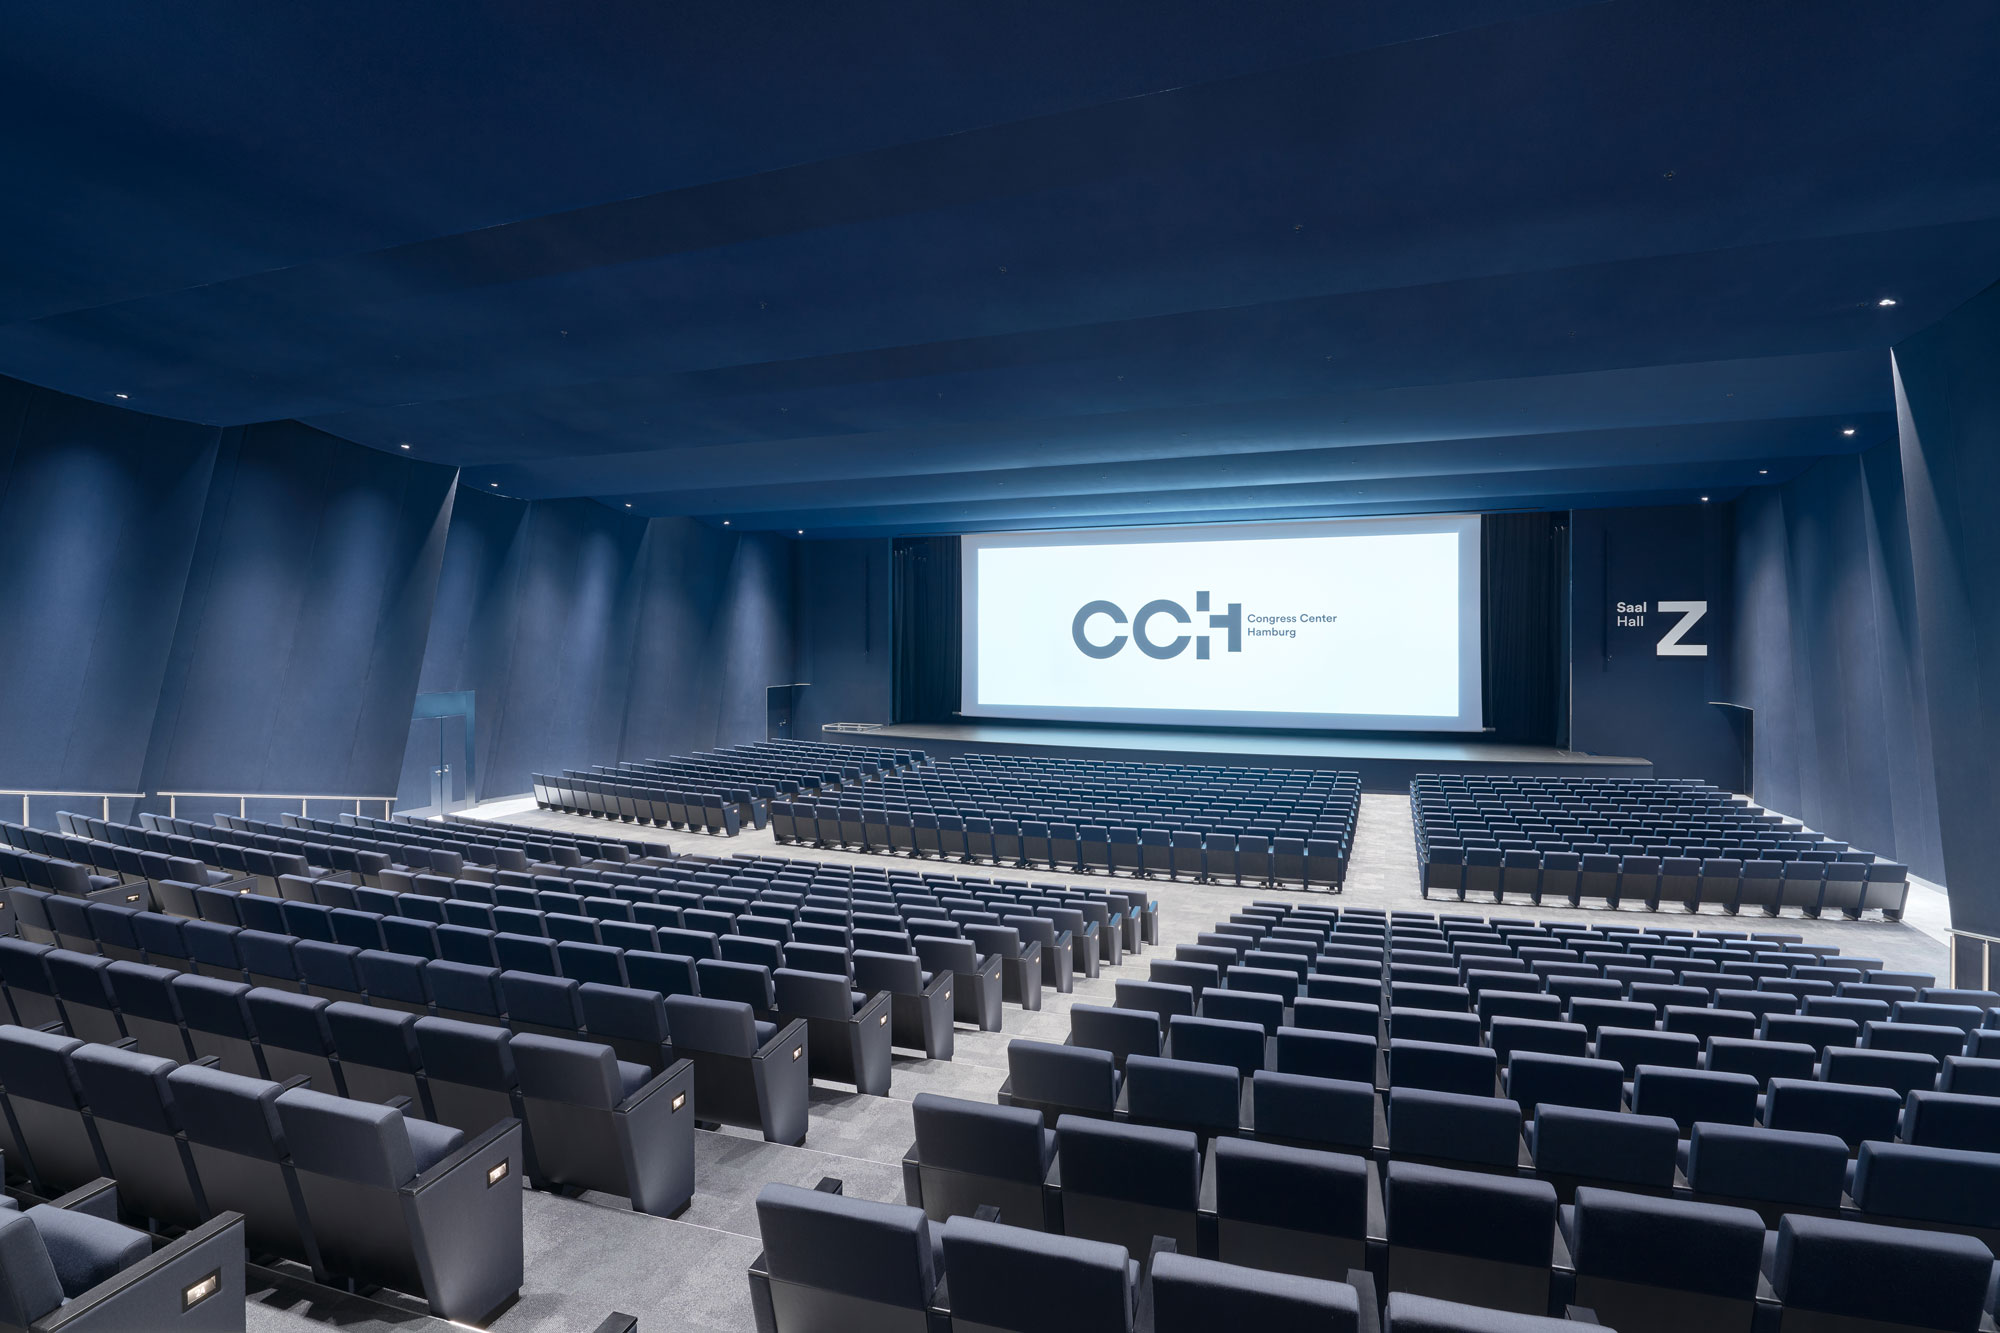 CCH - Saal Z